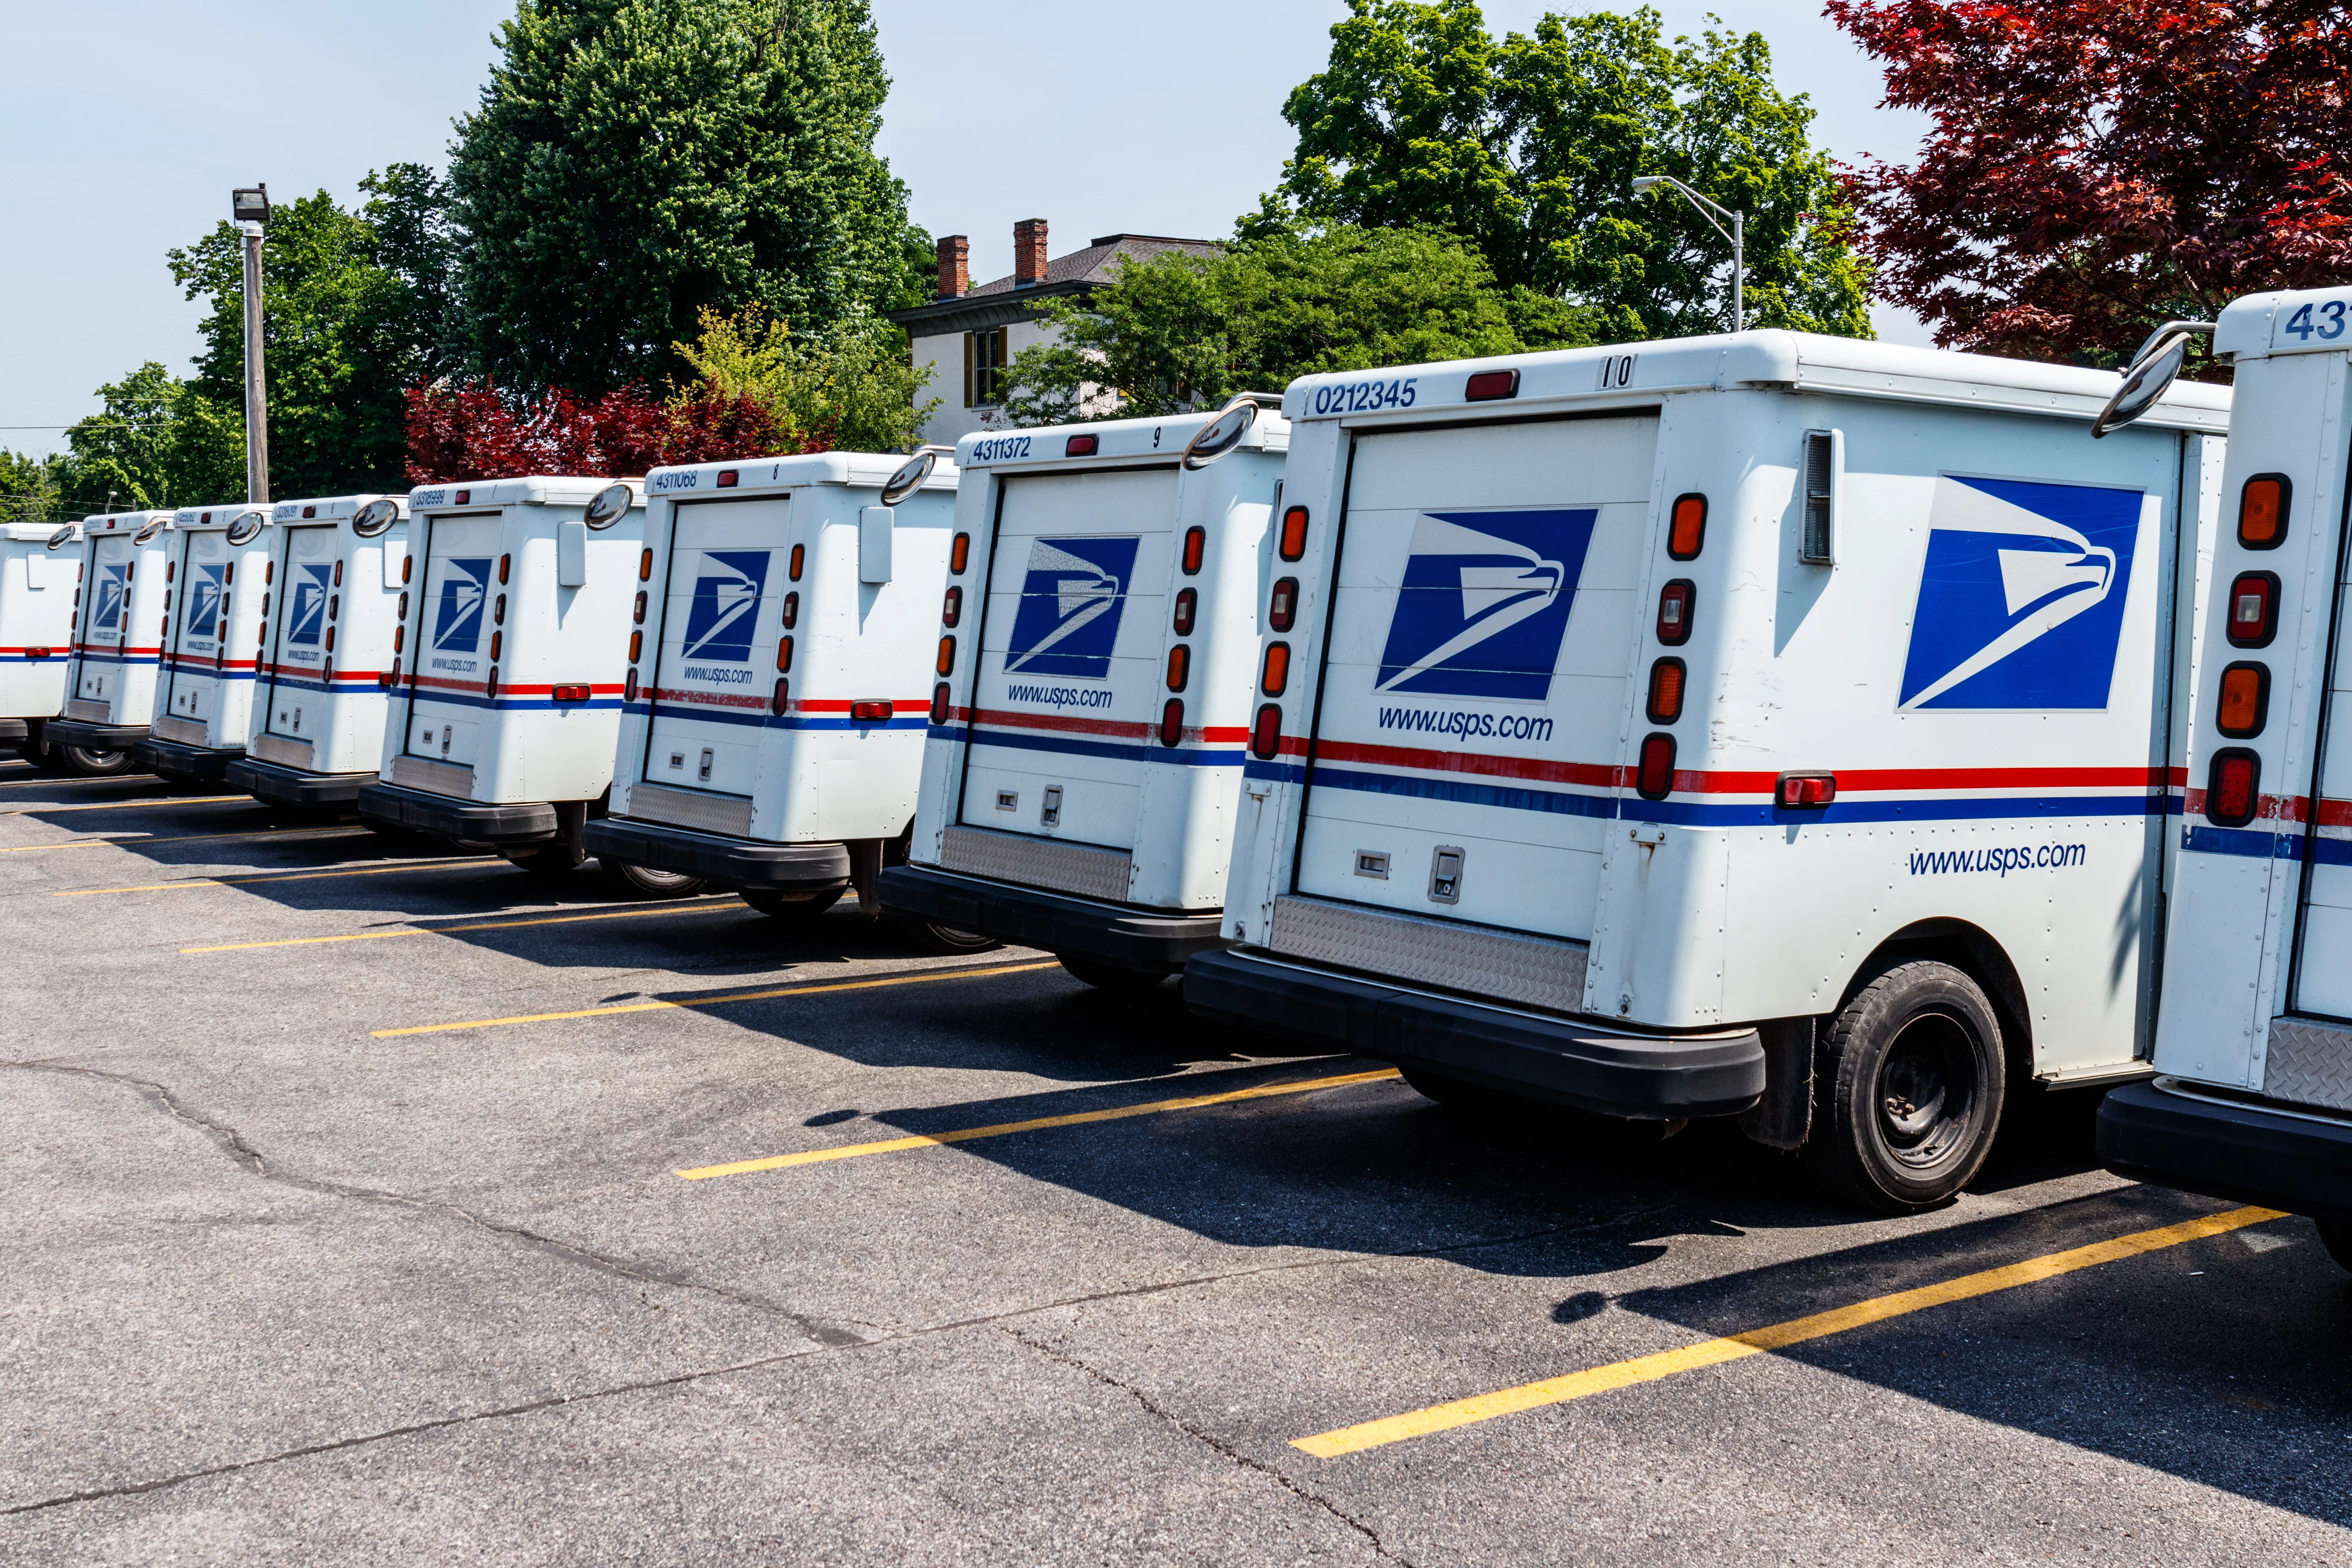 Logansport - Circa June 2018: USPS Post Office Mail Trucks. The Post Office is Responsible for Providing Mail Delivery IV